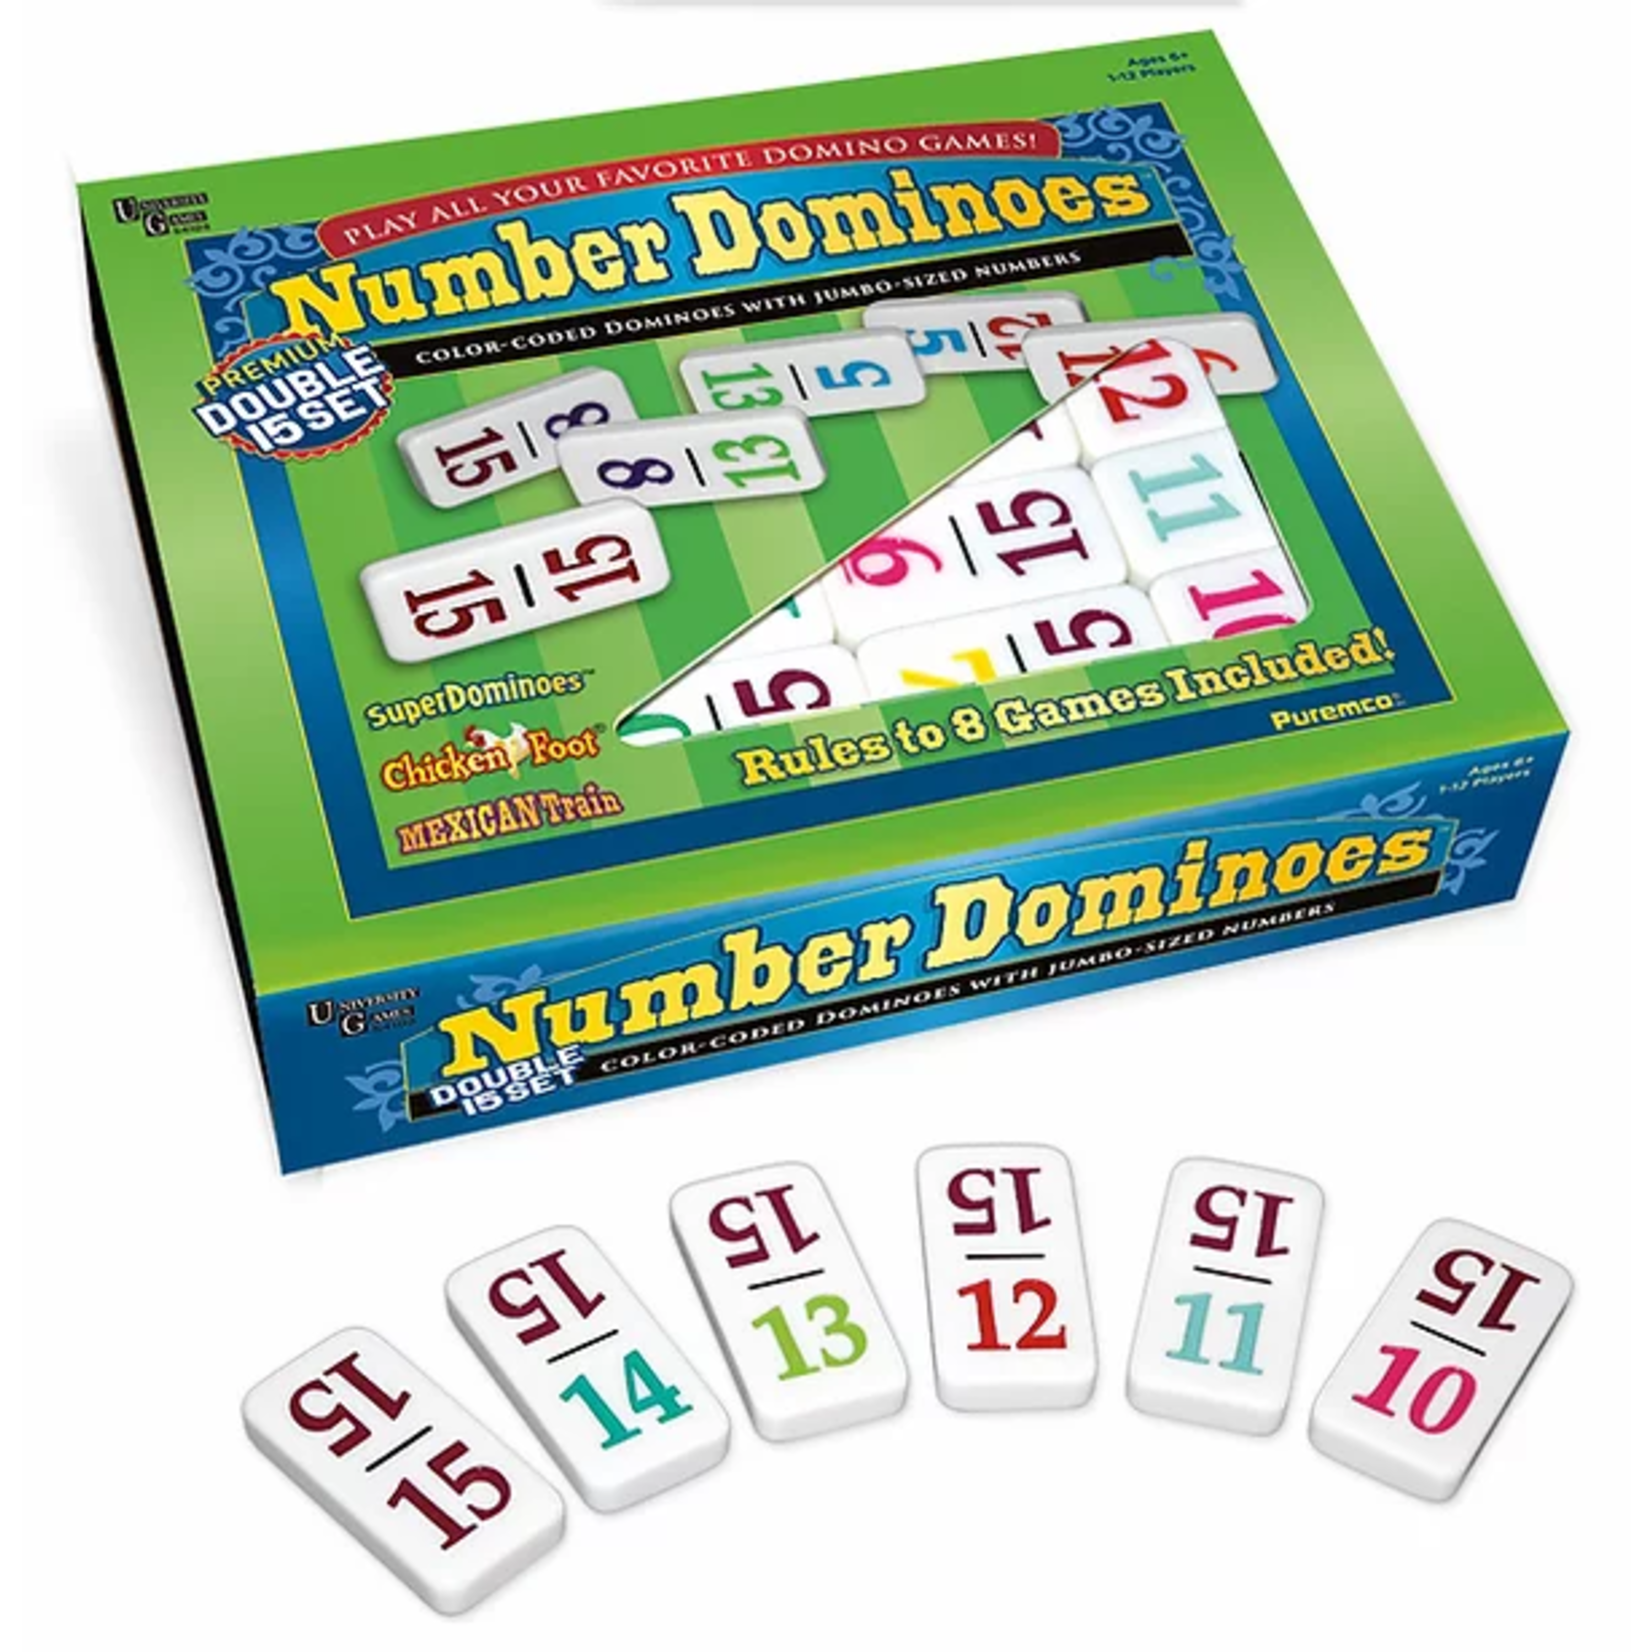 Puremco Double 15 Number Dominoes: Pro Size White/Color Numbers (UG)